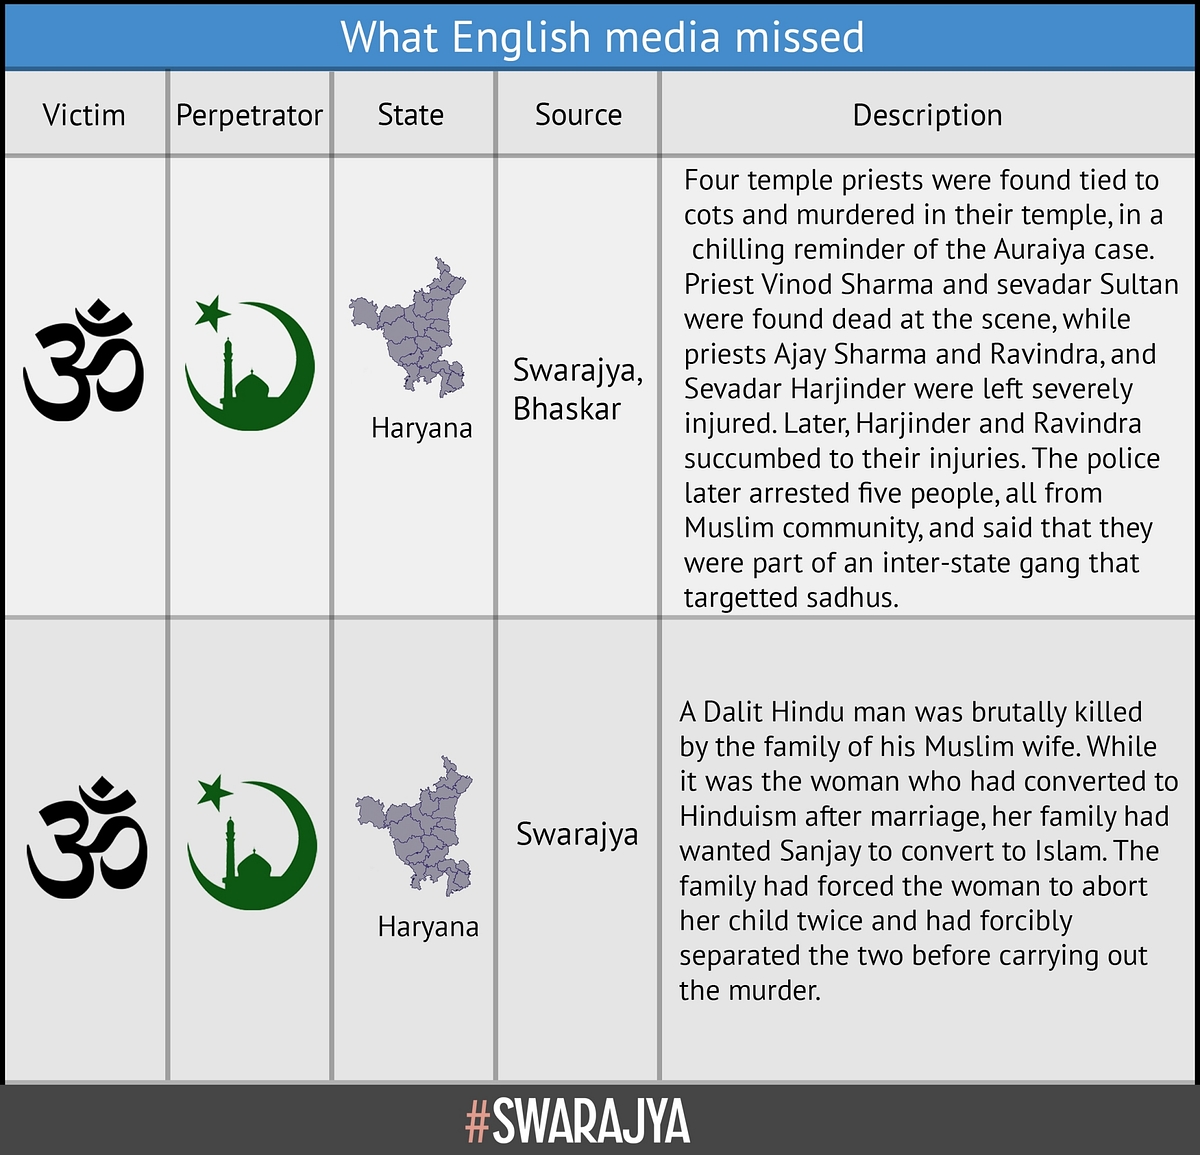 Selective Data On Communal Violence In India: IndiaSpend, English Media Have A Lot To Answer For